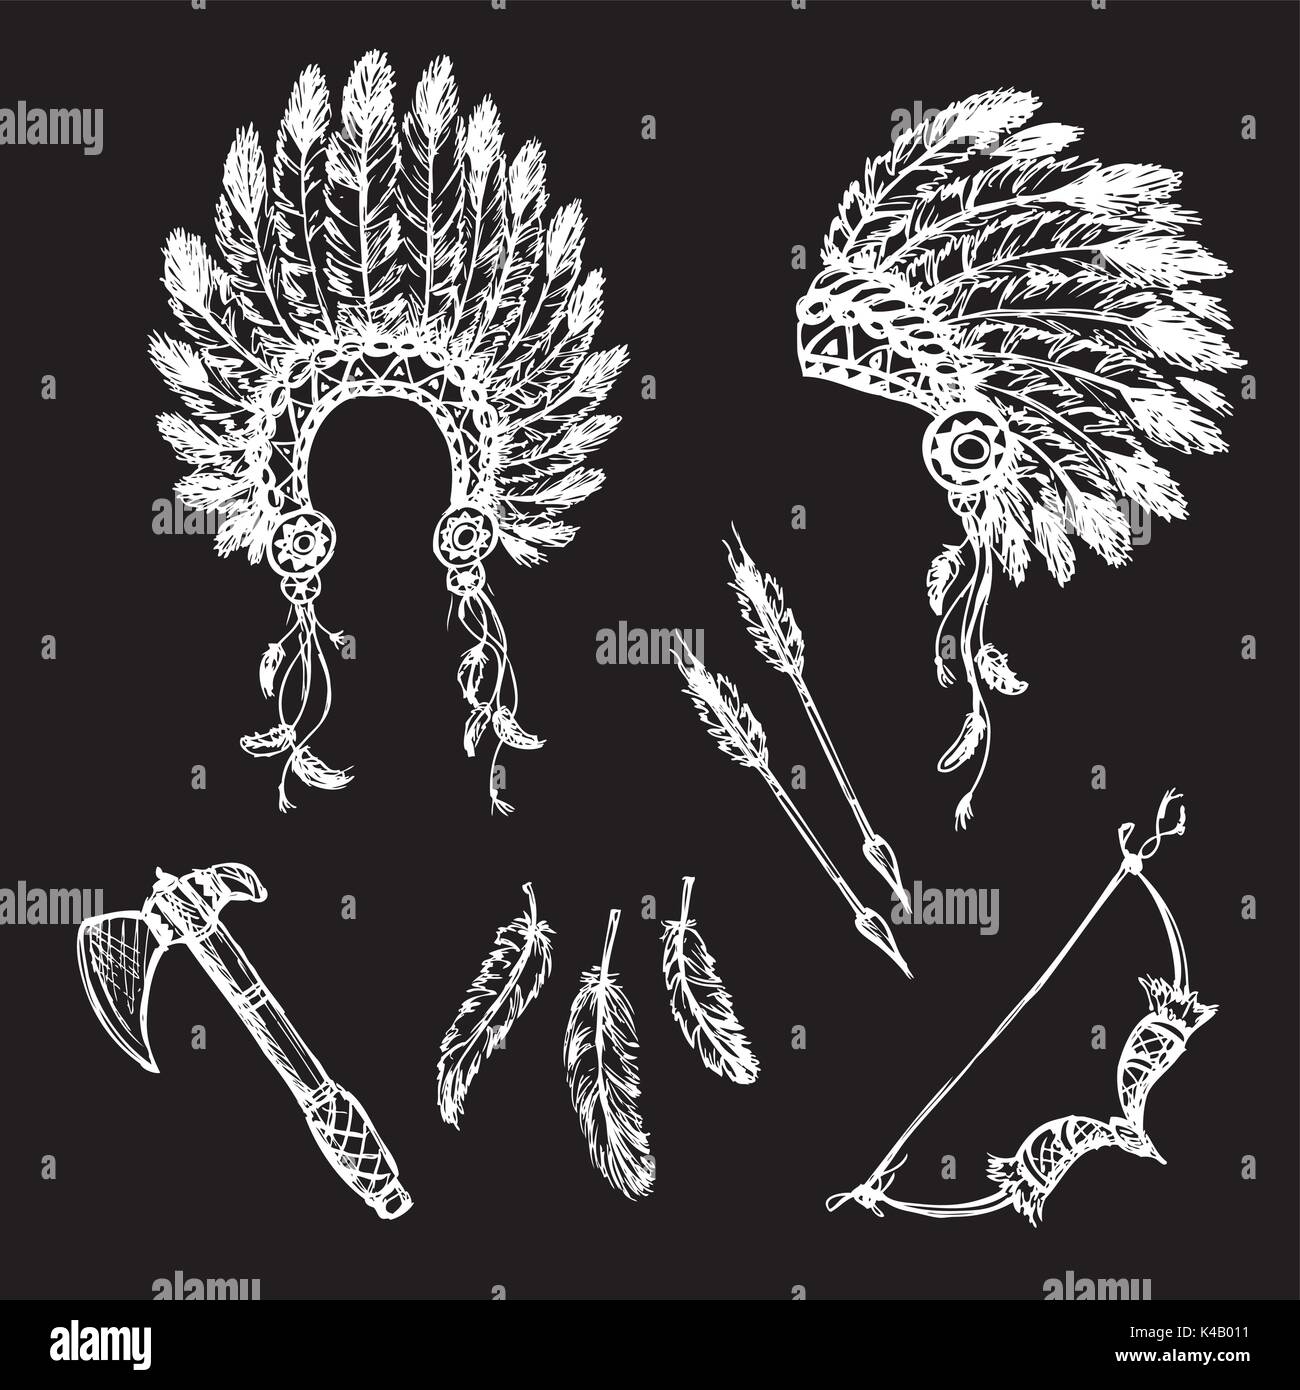 Collection of vintage hand drawn design elements: peace pipe, Indian hat, dream catcher, ax, feathers. White on black. Vector illustration Stock Vector